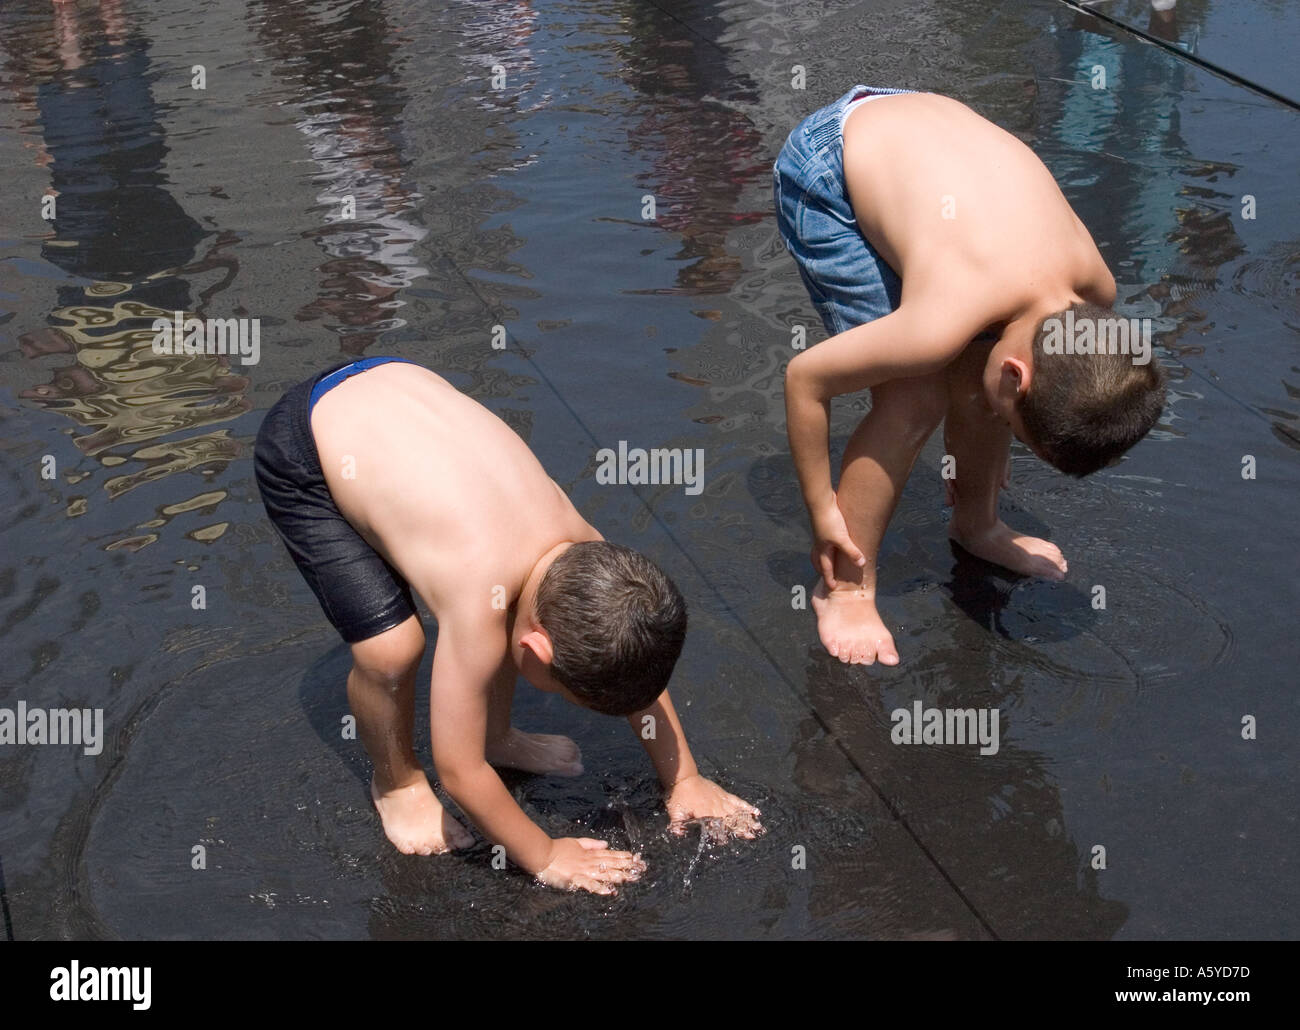 Two boys playing in water Crown Fountain Millennium Park Chicago Illinois USA Stock Photo